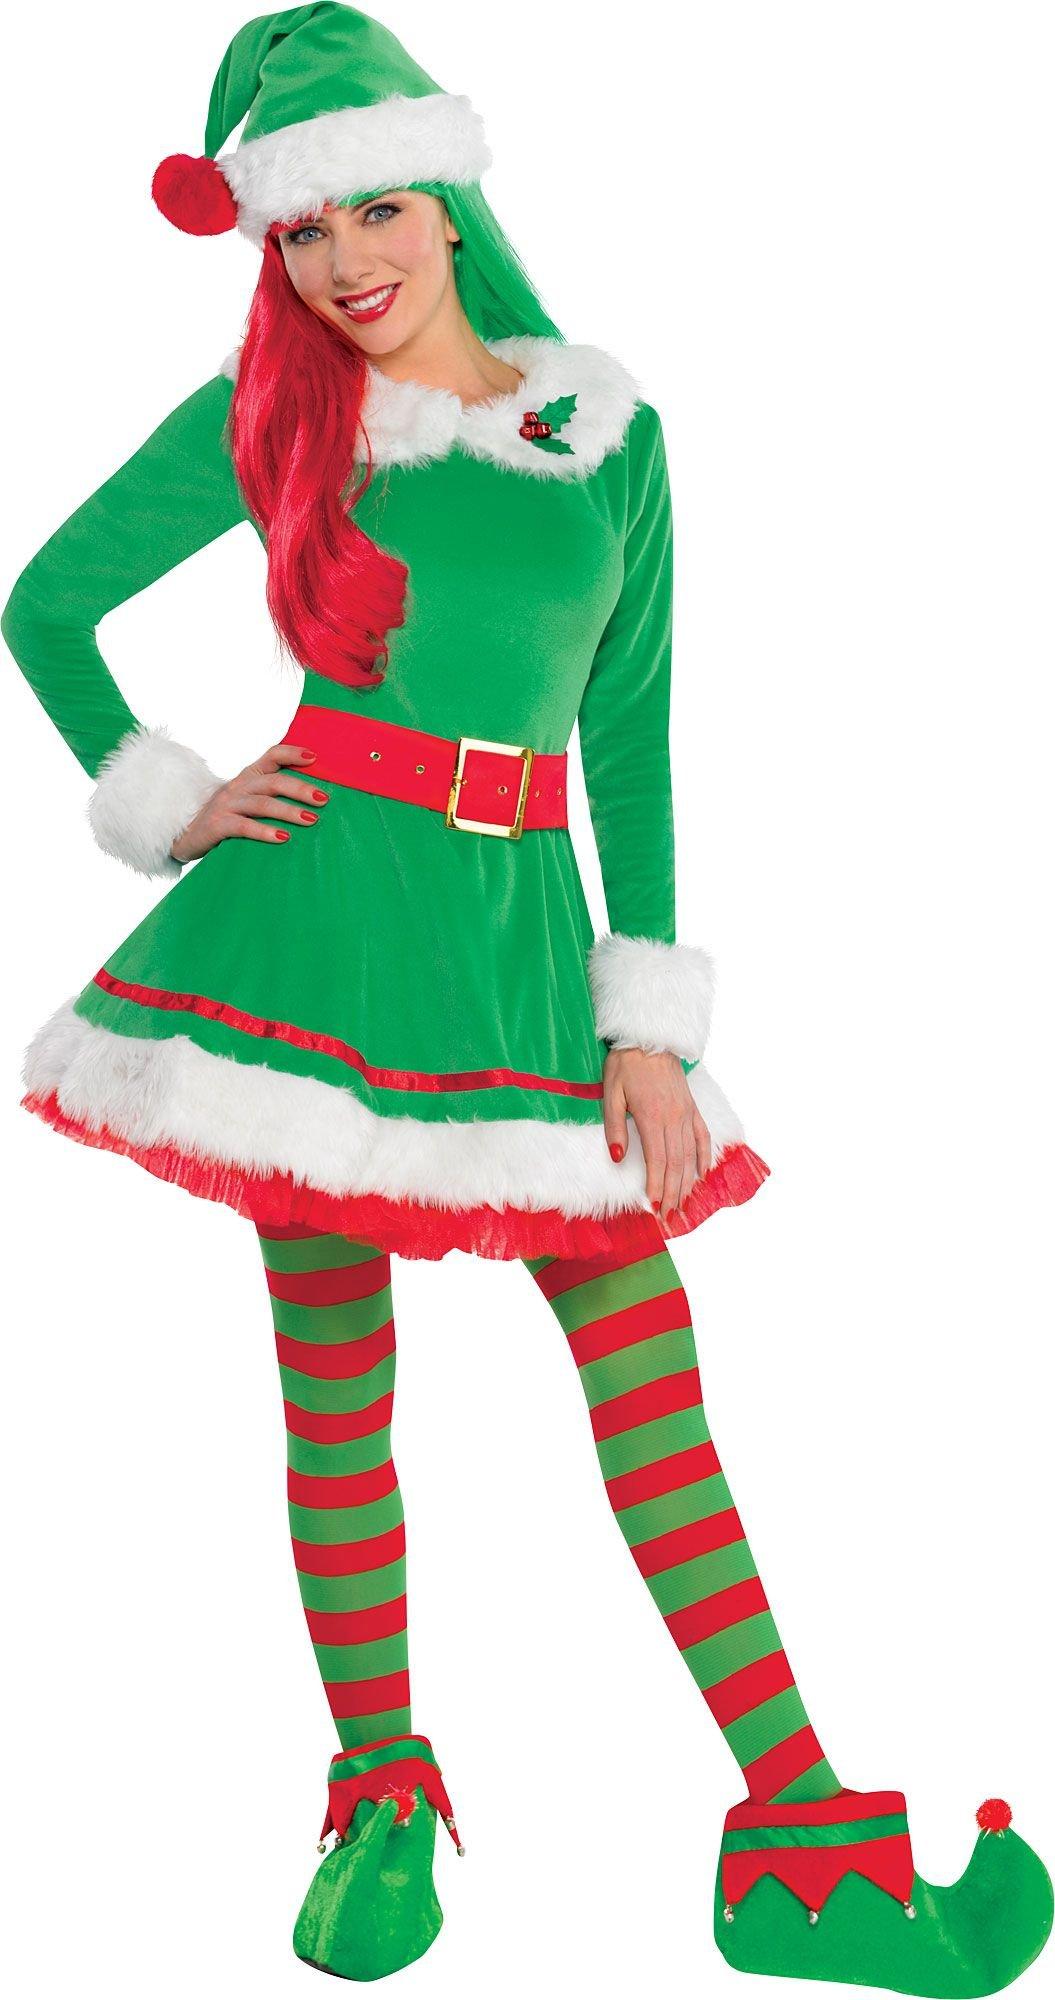 Elf Costumes & Outfits for Adults & Kids | Party City